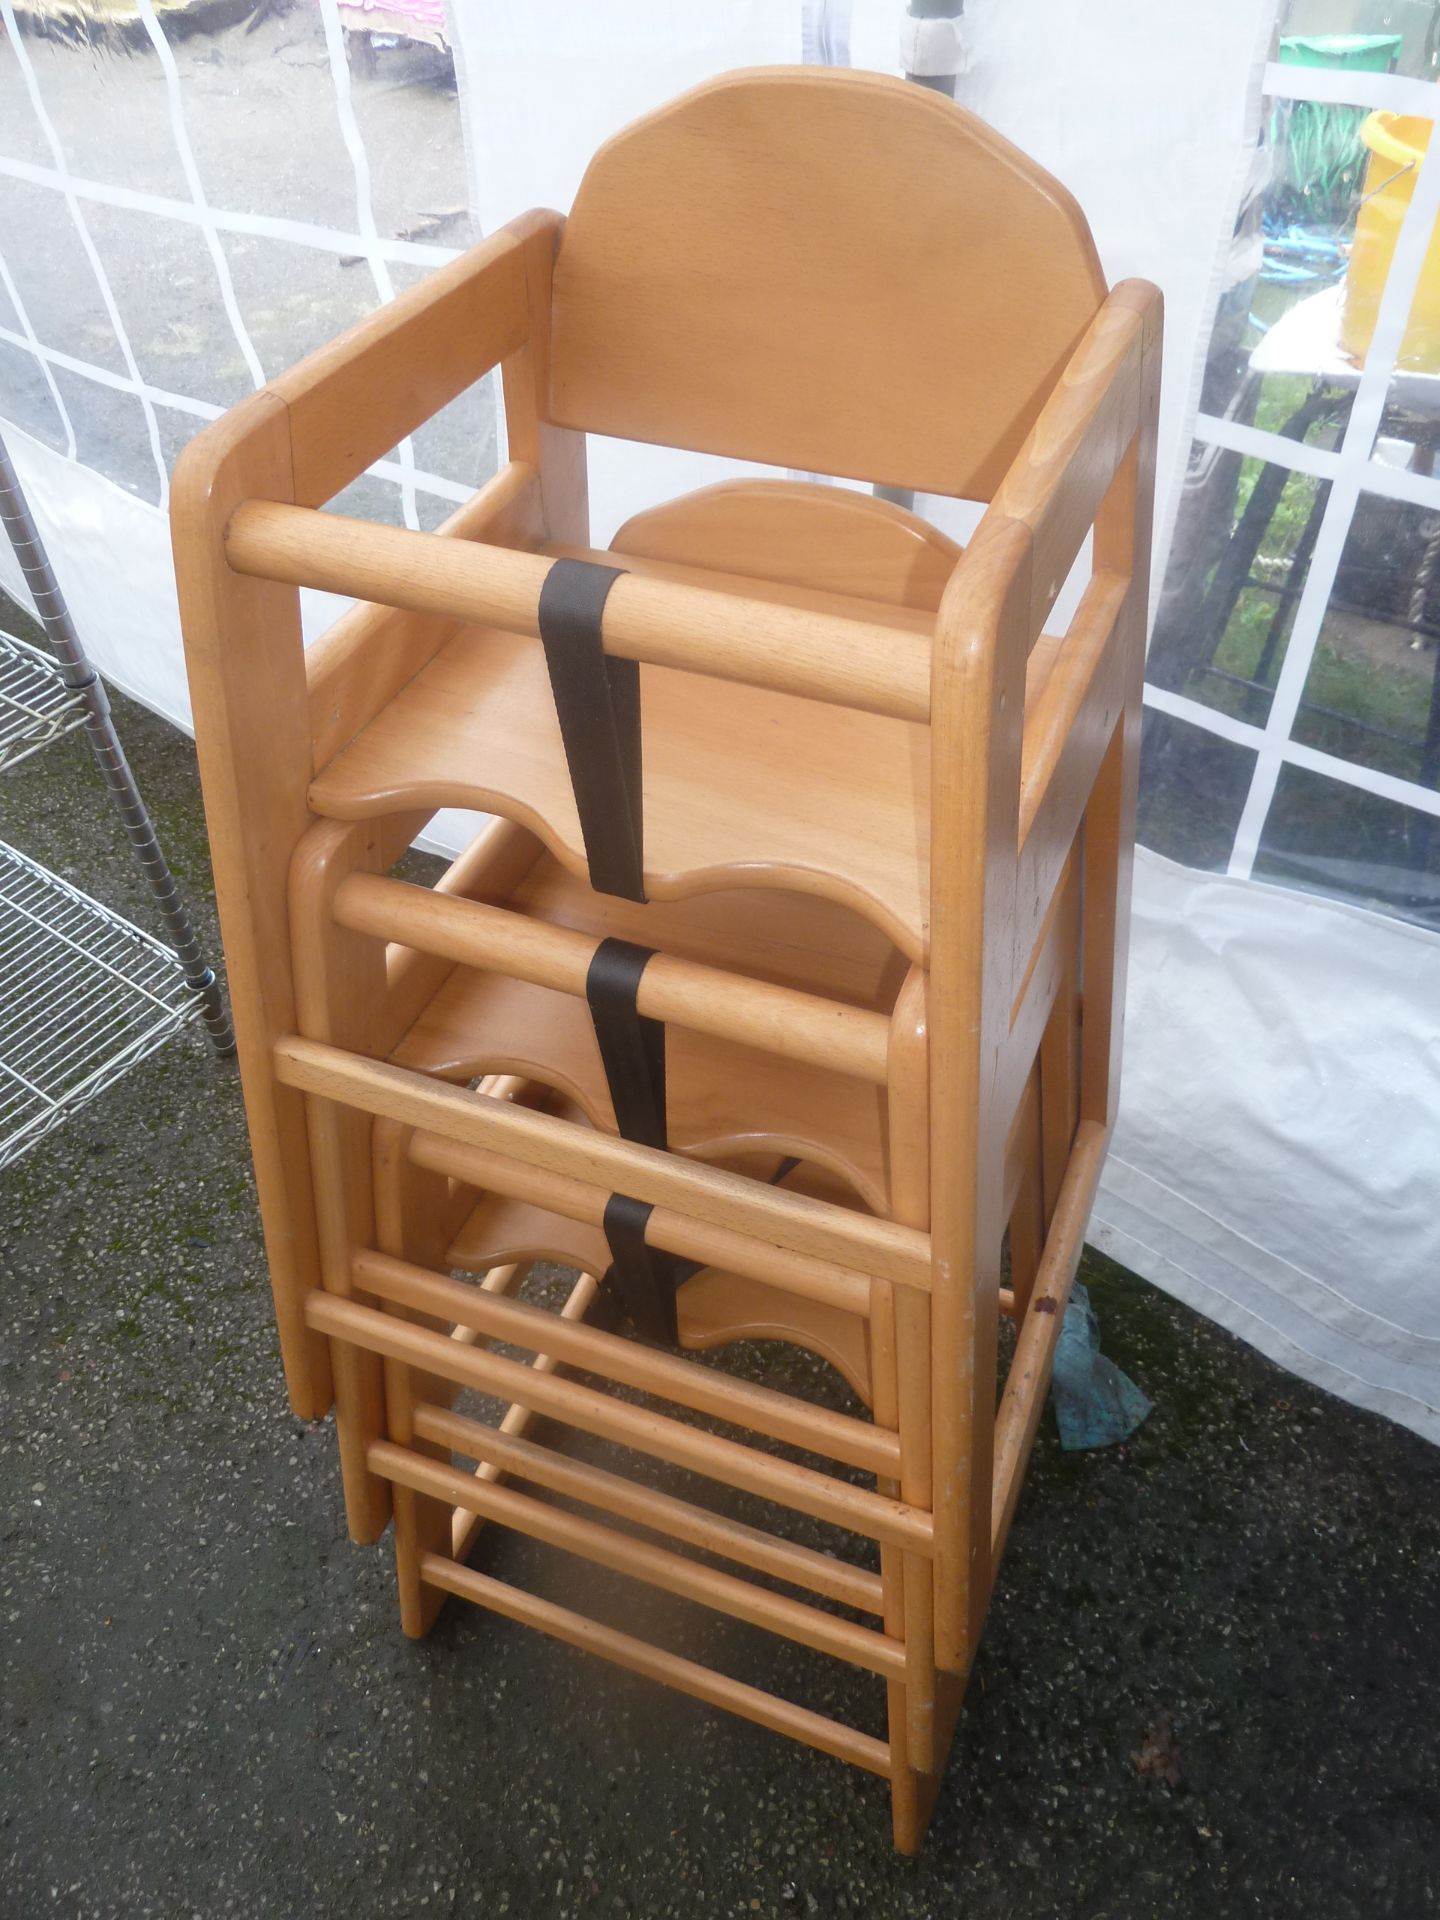 wooden child high chairs x 3 - Image 2 of 2